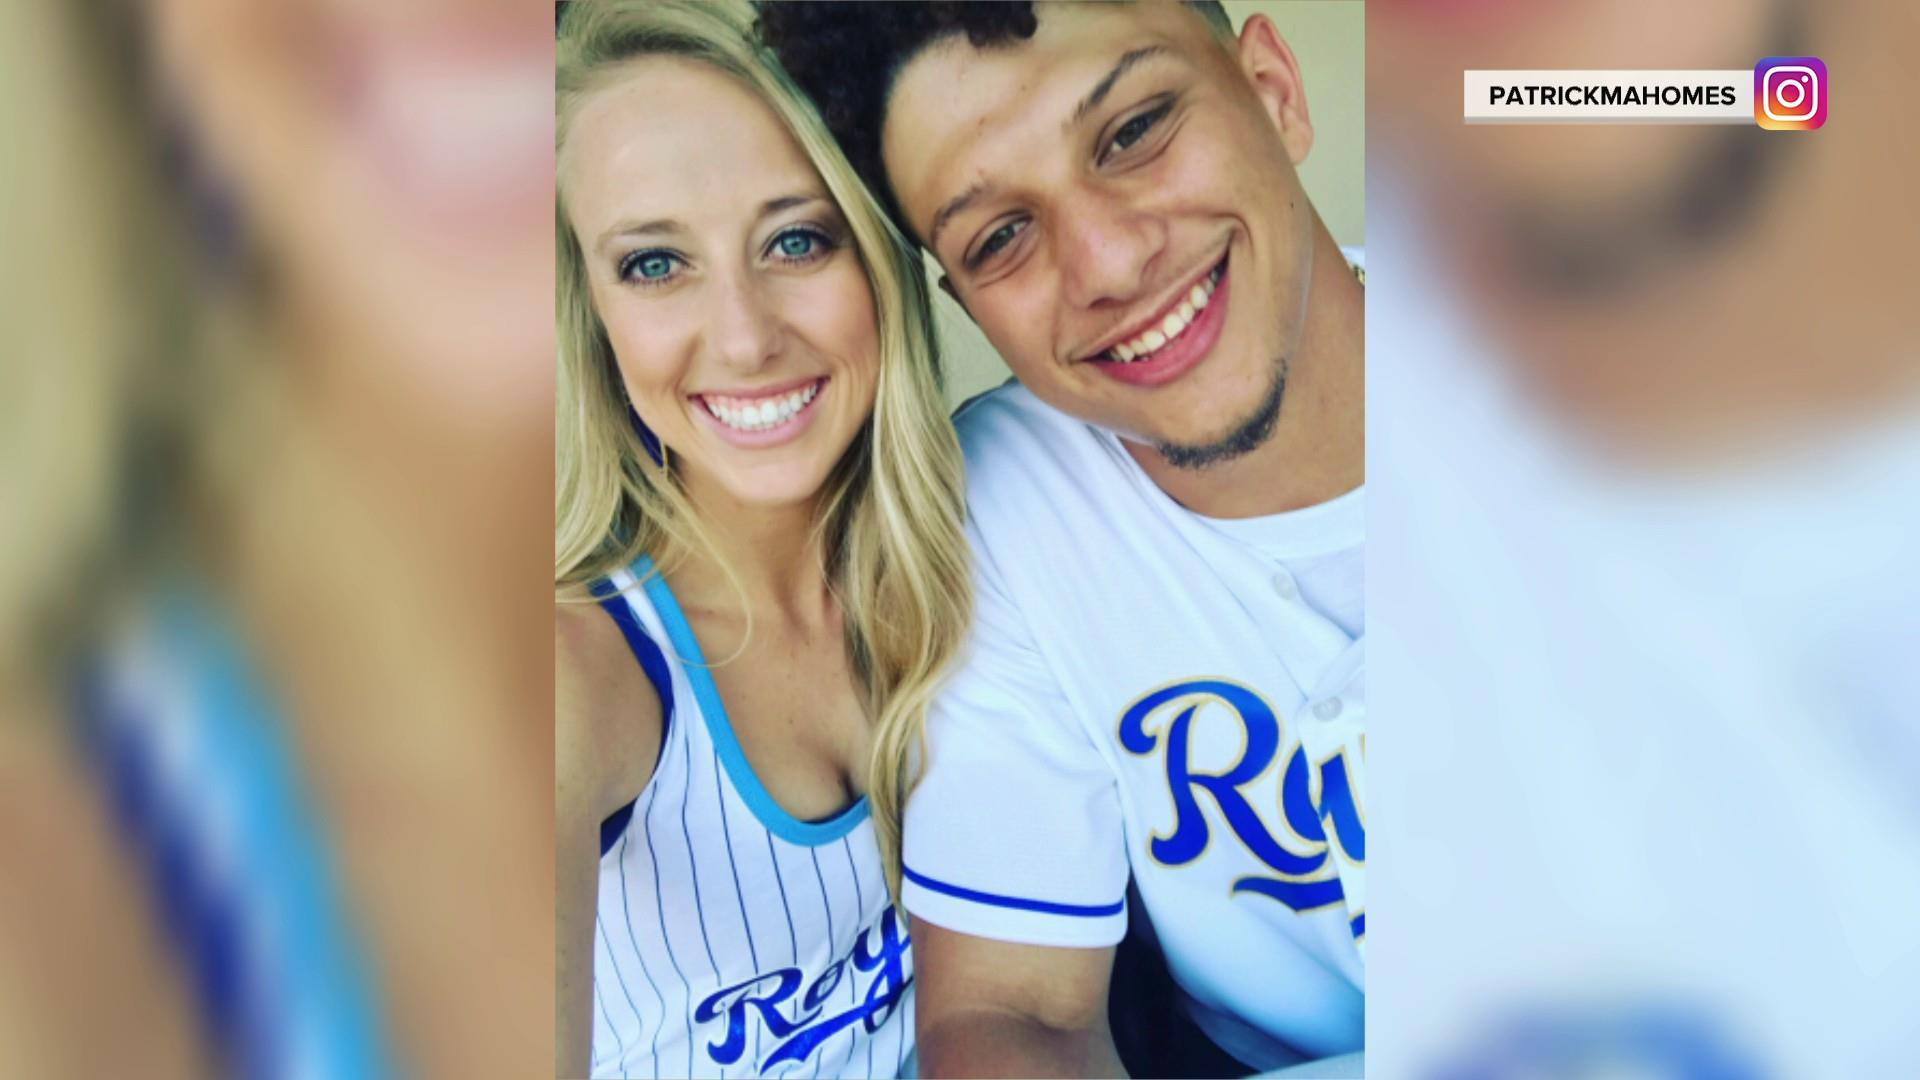 Patrick Mahomes On Proposing To Girlfriend Brittany Matthews